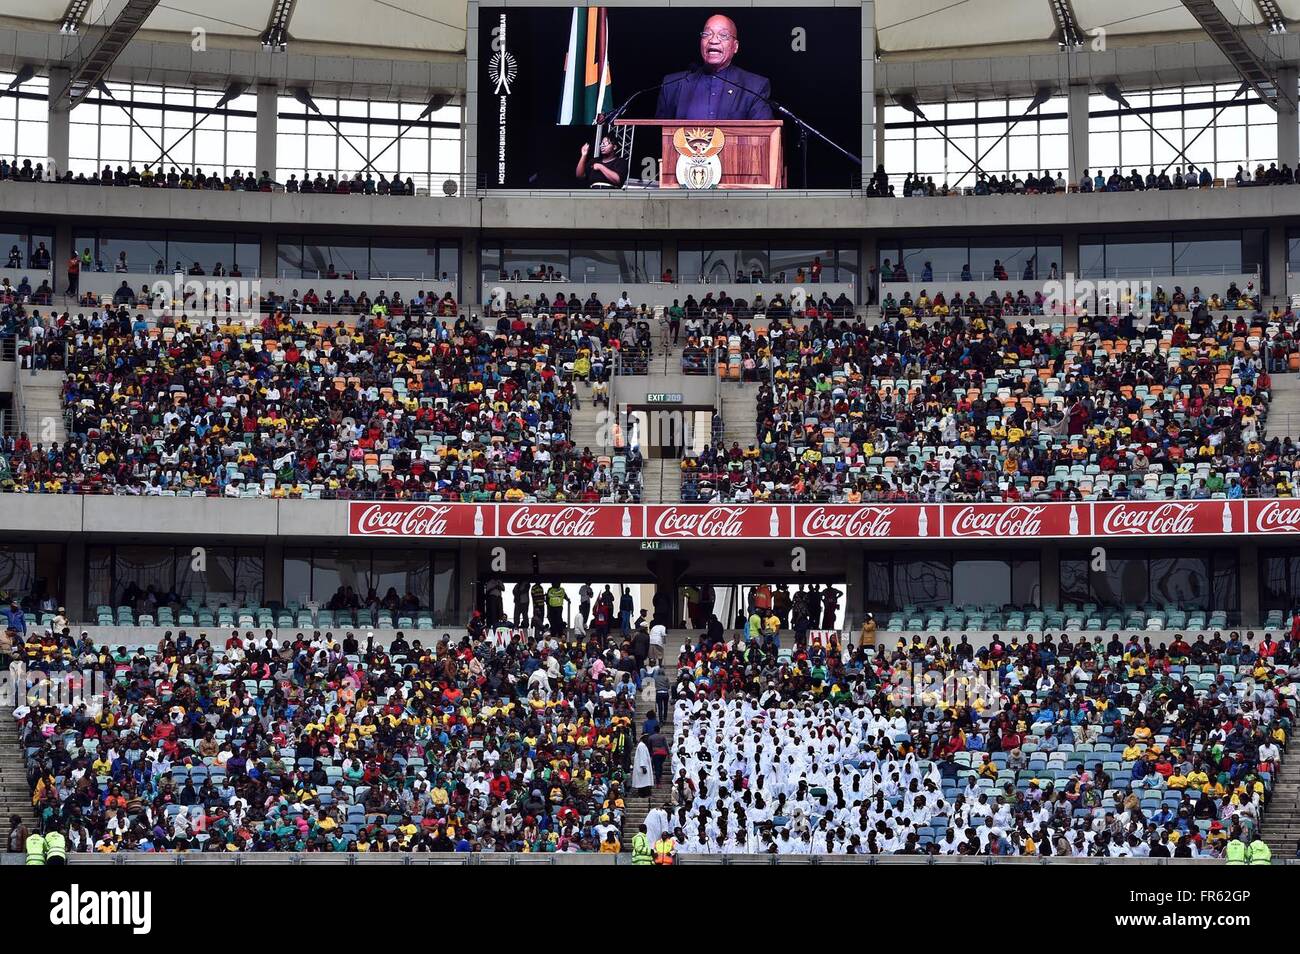 Durban, Durban. 21st Mar, 2016. South Africans take part in?a mass rally marking the International Human Rights Day while South African President Jacob Zuma delivers an address at Moses Mabhida Stadoum, Durban, South Africa on March 21, 2016. South Africans on Monday marked the International Human Rights Day, with President Jacob Zuma calling for the fight against rising racism, which has led to tension in the country. © DOC/Elmond Jiyane/Xinhua/Alamy Live News Stock Photo